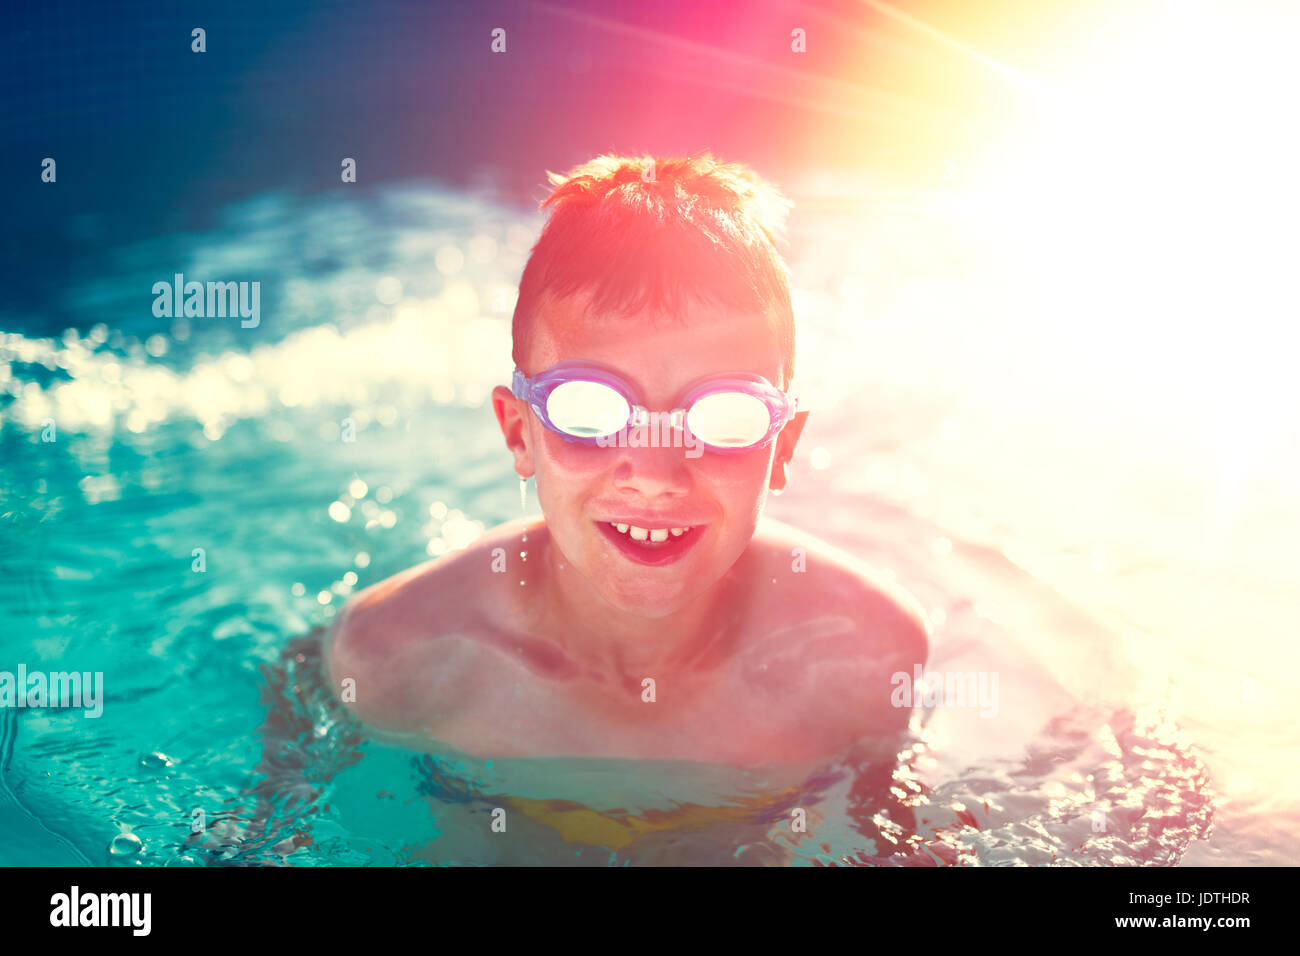 Happy kid in swimming pool enjoying summer holiday in sunset, vintage style Stock Photo